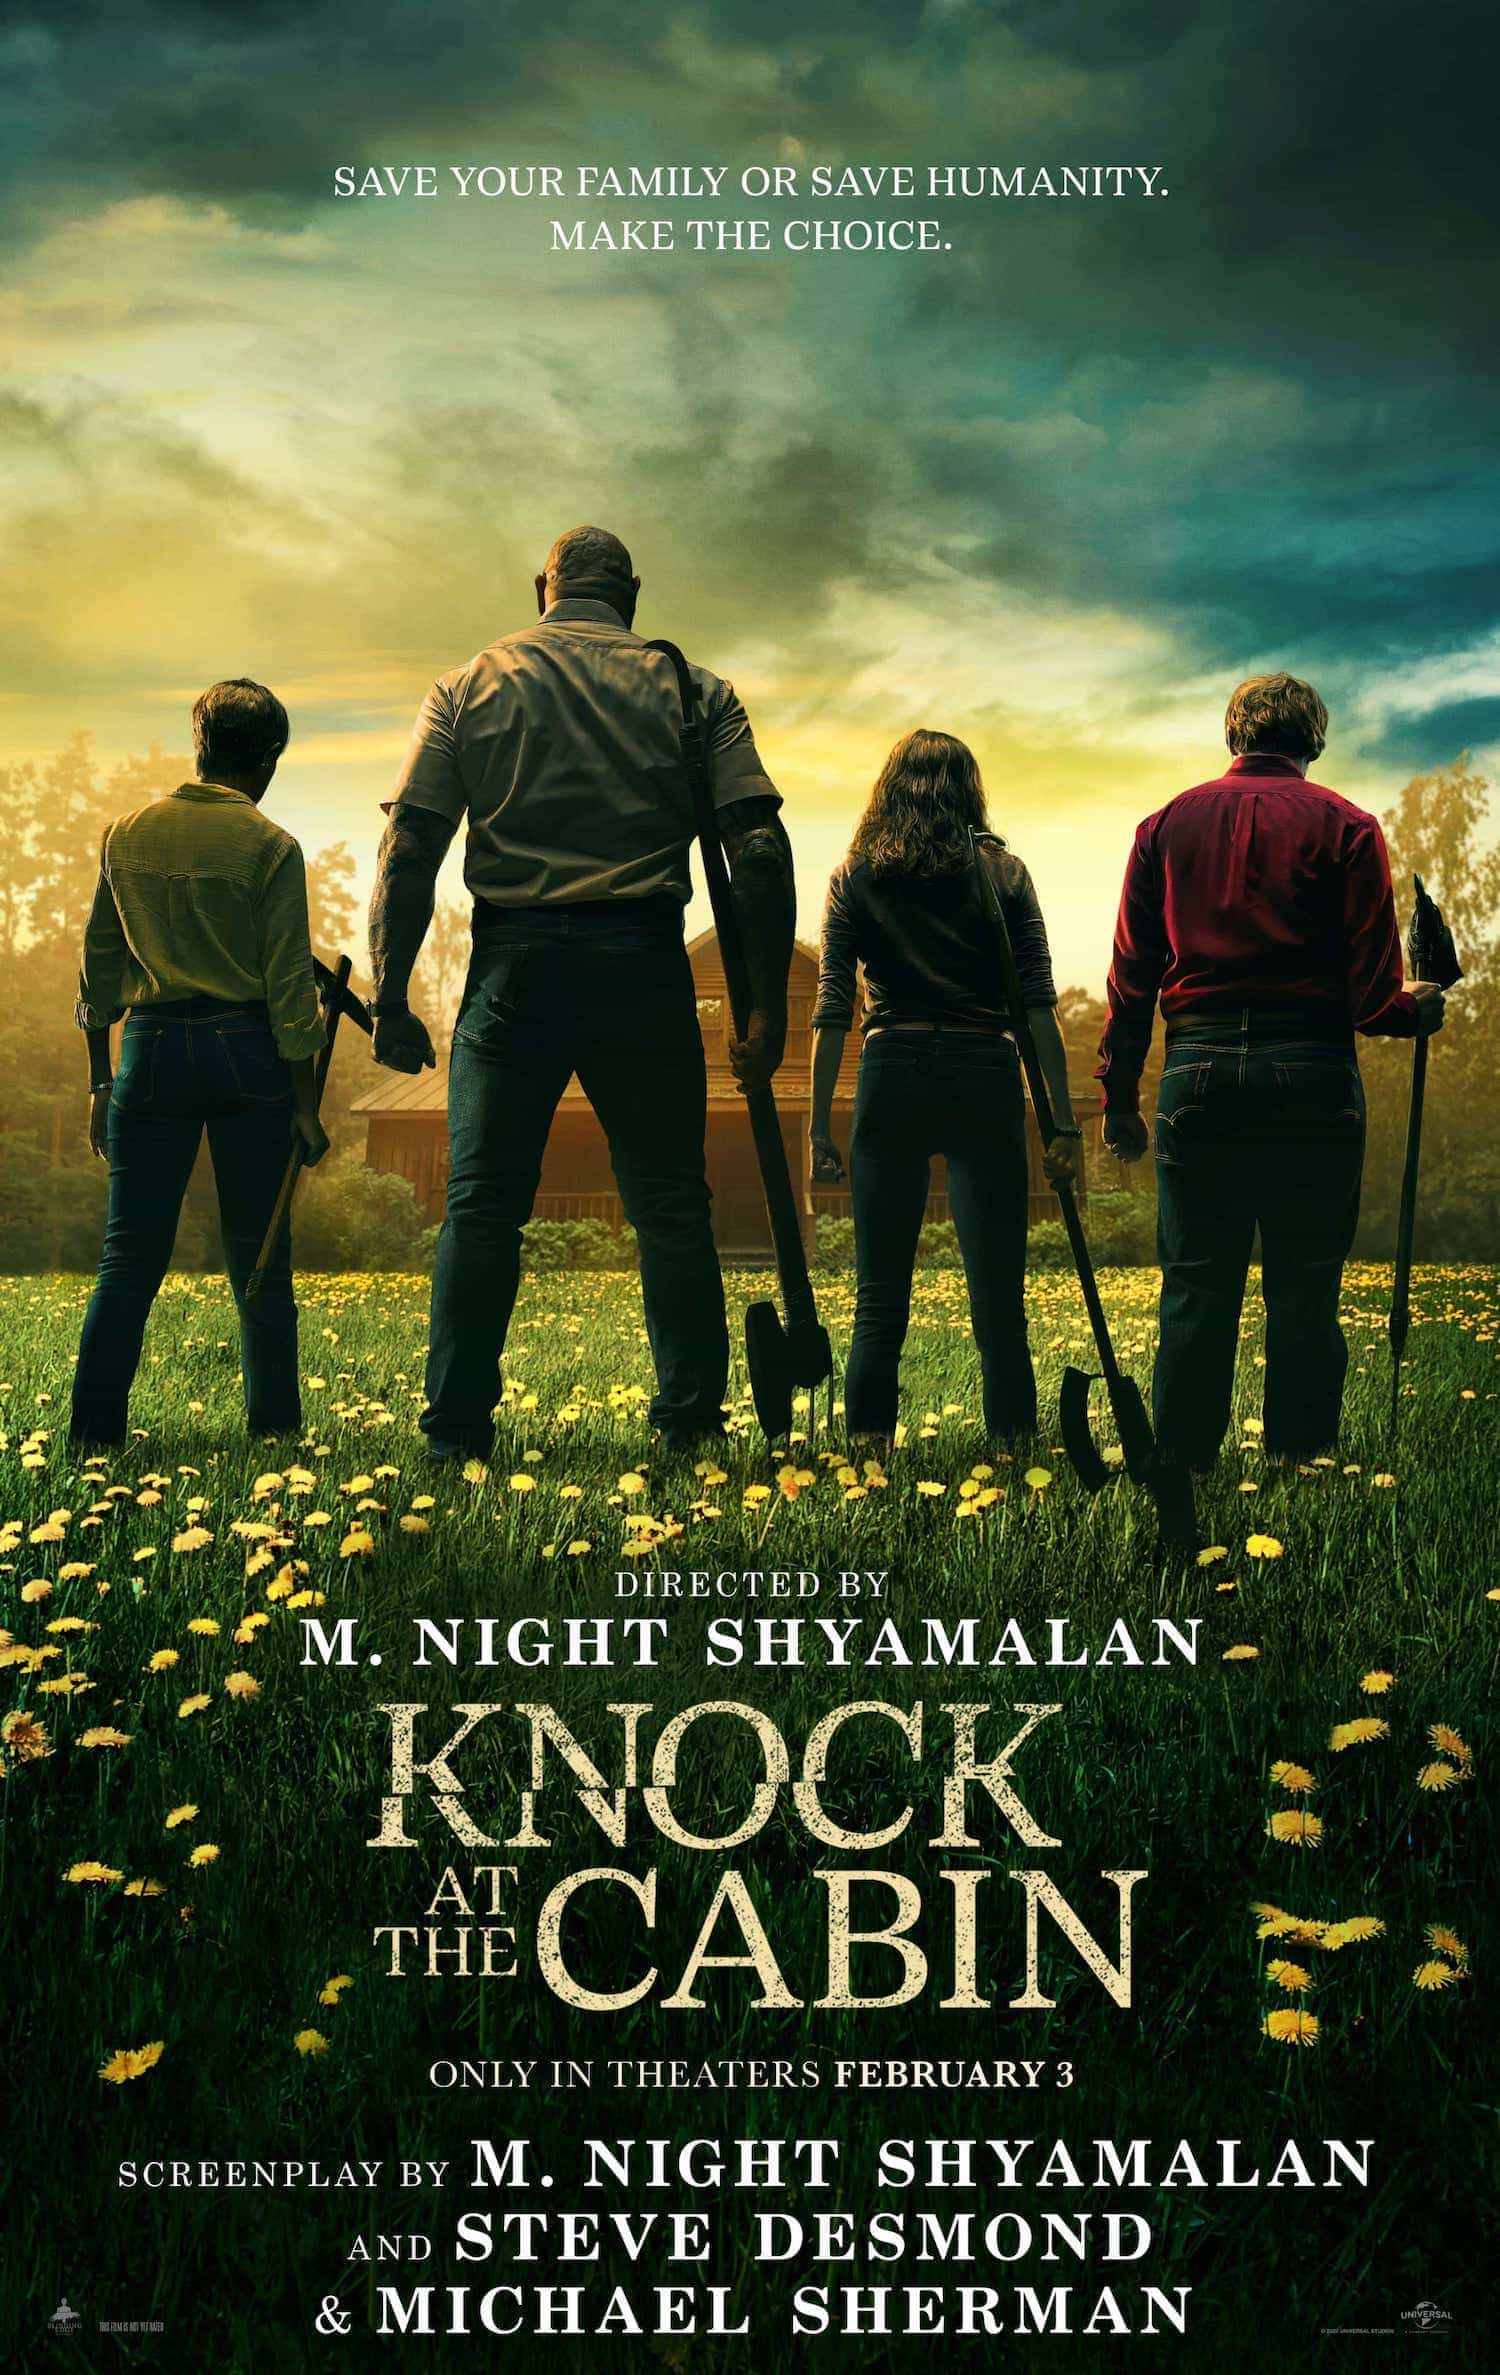 Knock at the Cabin has been given a 15 age rating in the UK for strong threat, violence, language, suicide